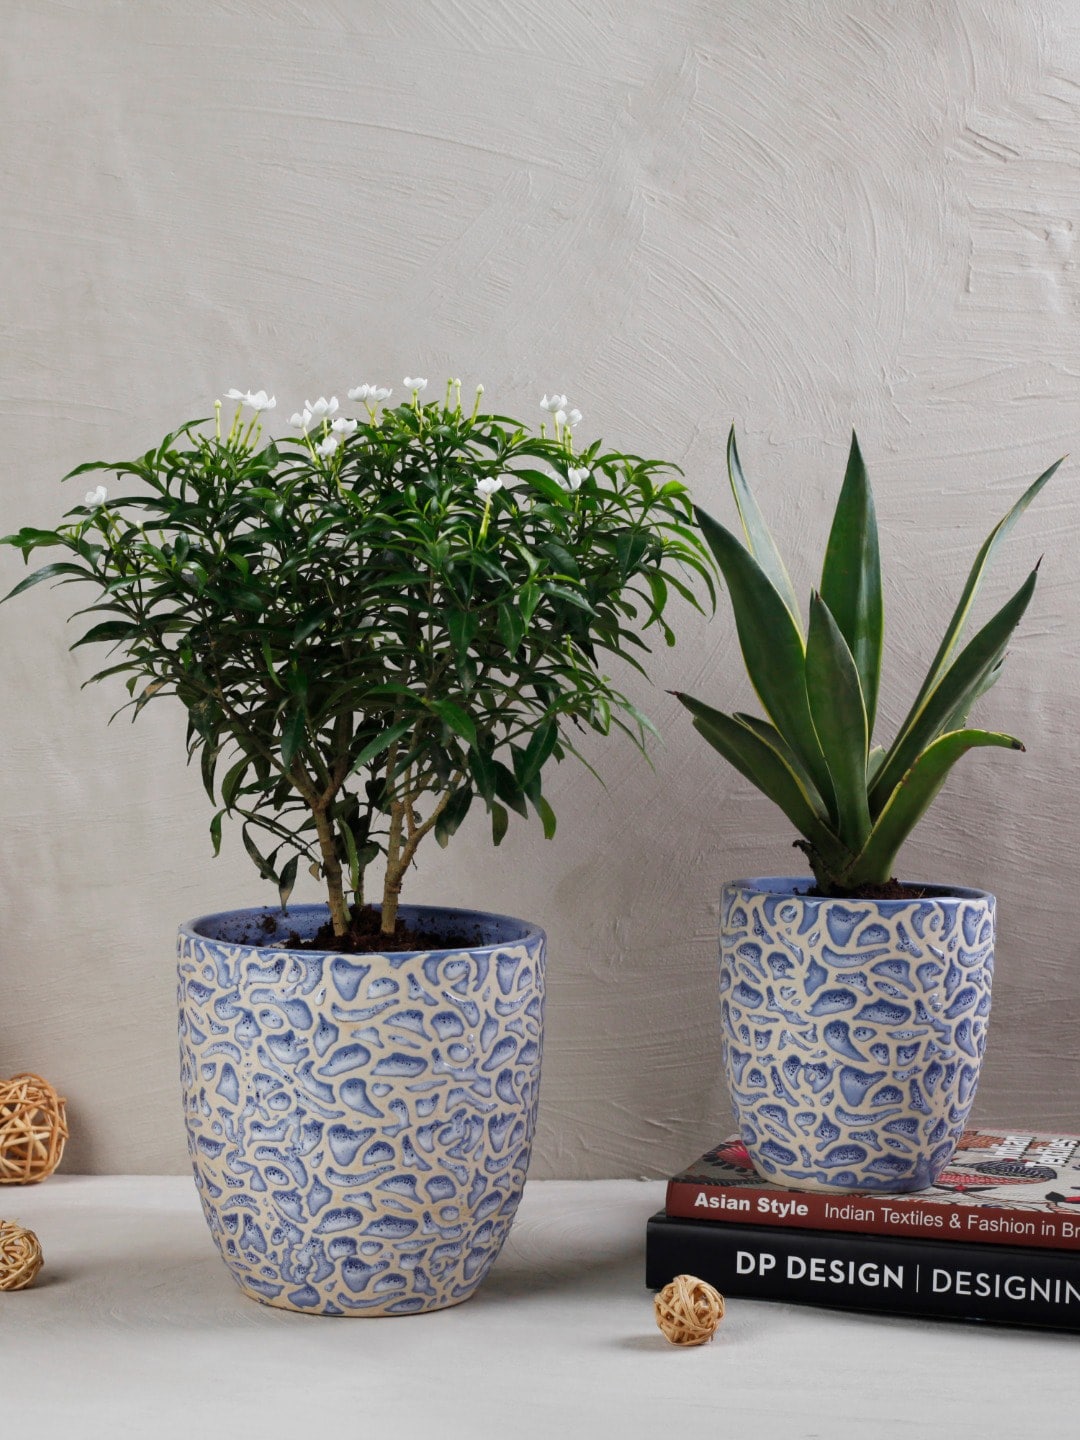 The 7 DeKor Blue & White Printed Textured Planter Price in India